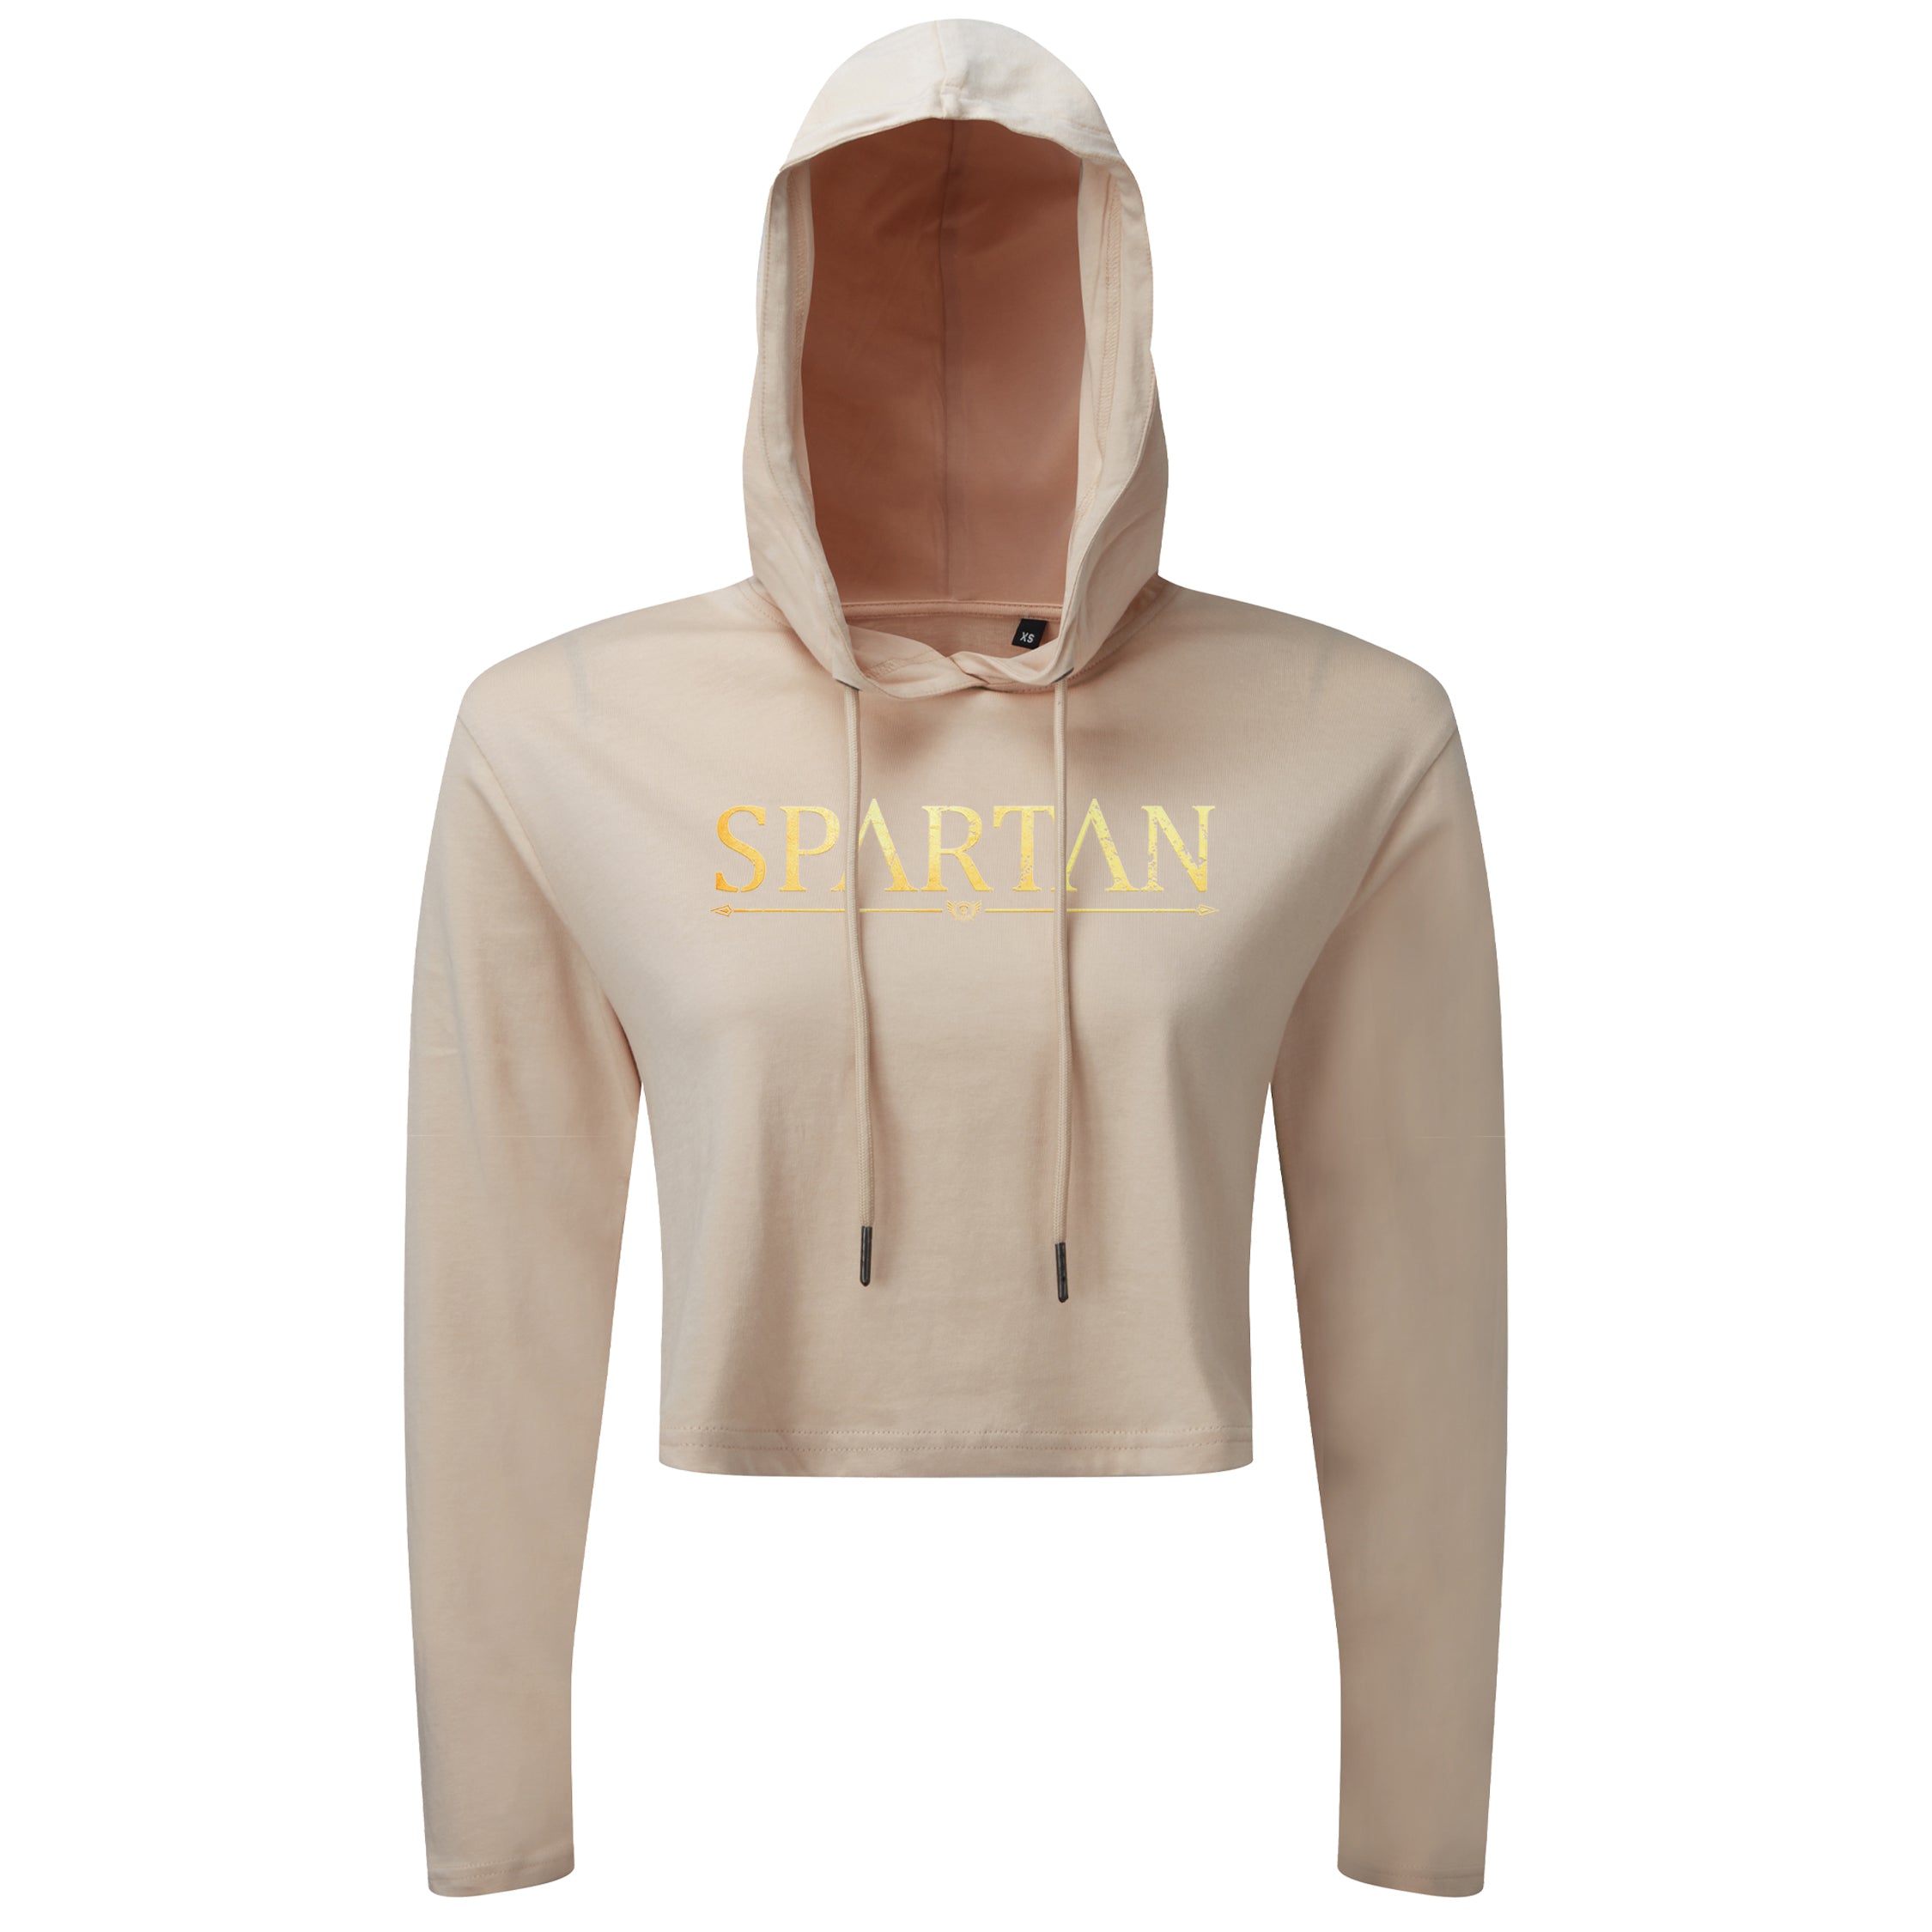 Spartan Gold - Spartan Forged - Cropped Hoodie